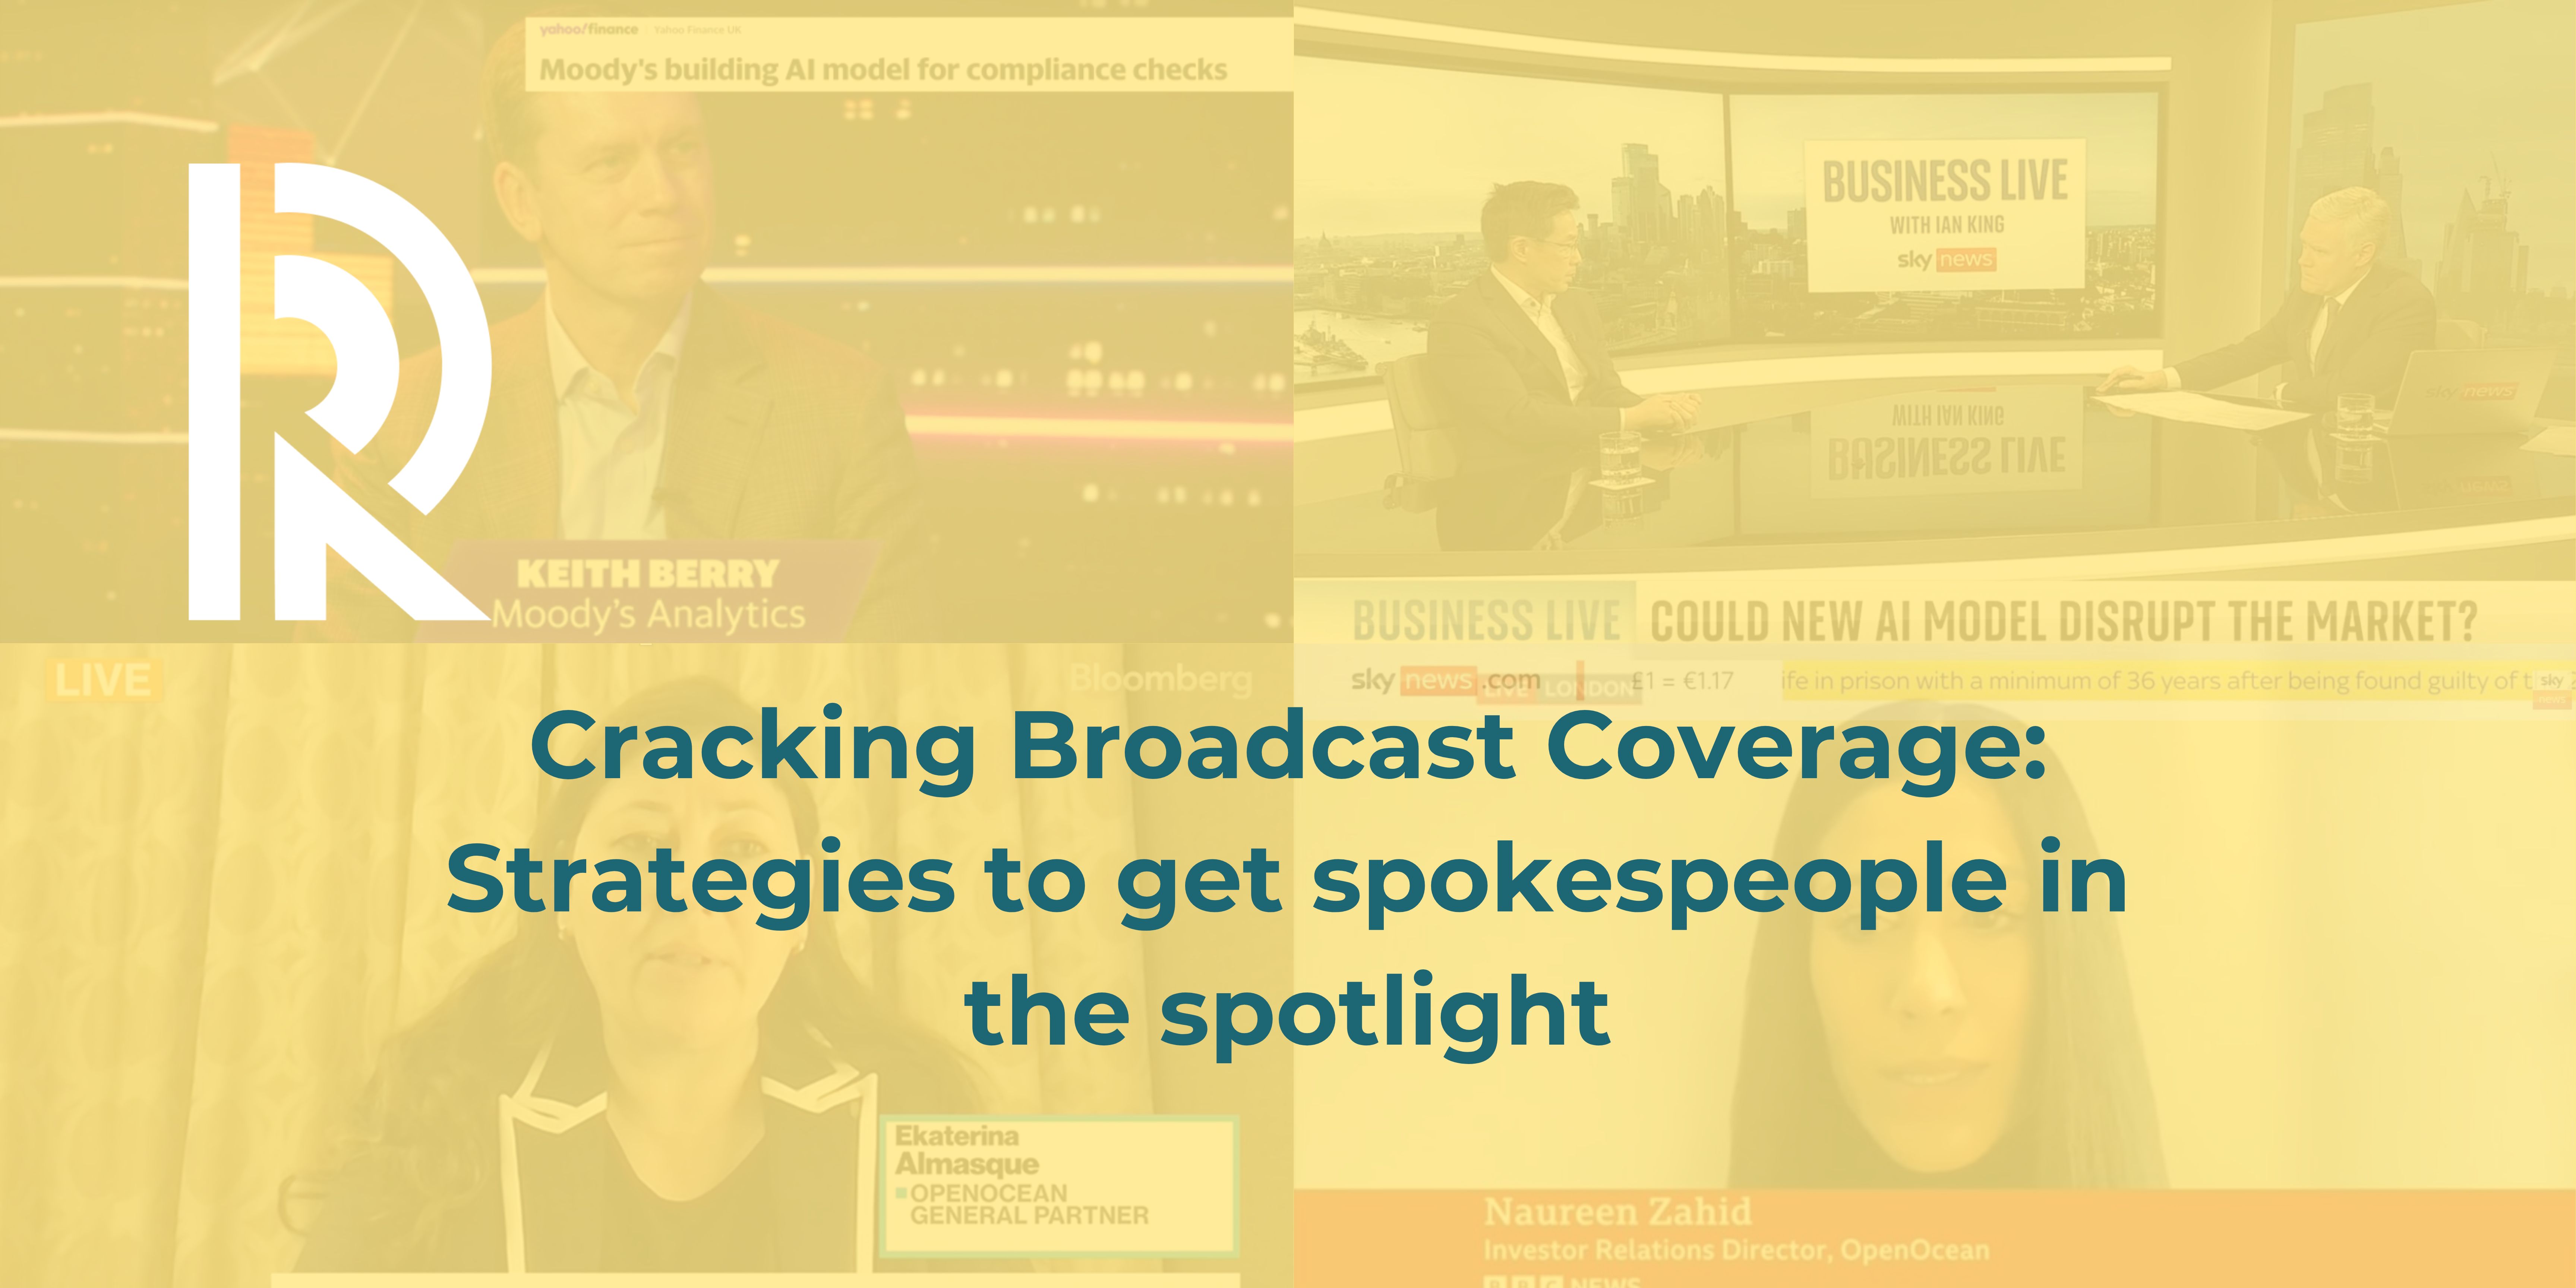 Cracking Broadcast Coverage: Strategies to get spokespeople in the spotlight